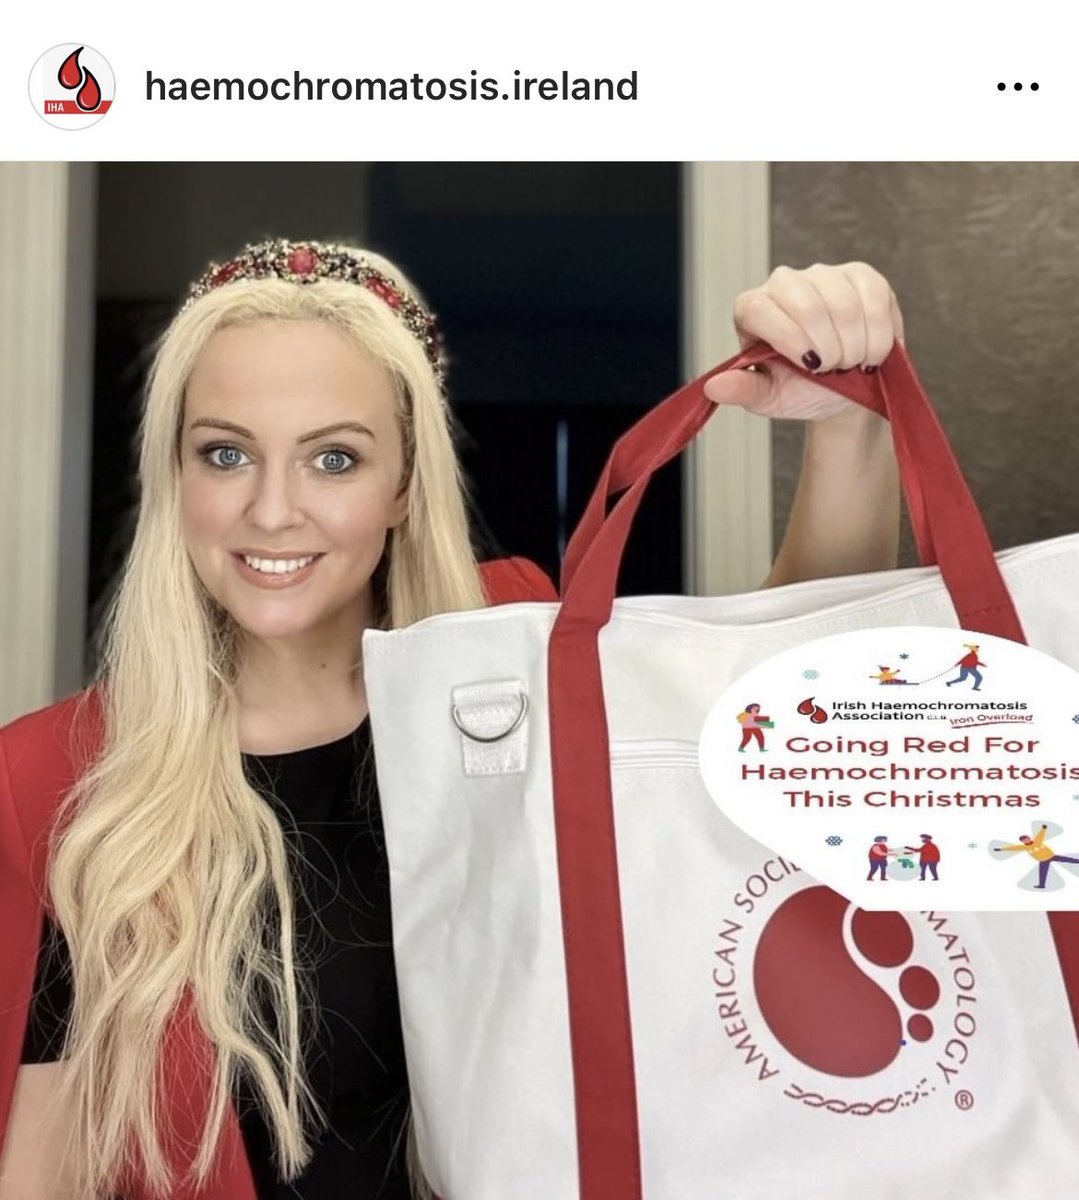 World Haemochromatosis Awareness Week starts today! 

Haemochromatosis is the most common genetic disorder in Ireland. Early diagnosis saves lives. 

Visit their website at haemochromatosis-ir.com

#haemochromatosisawarenessweek